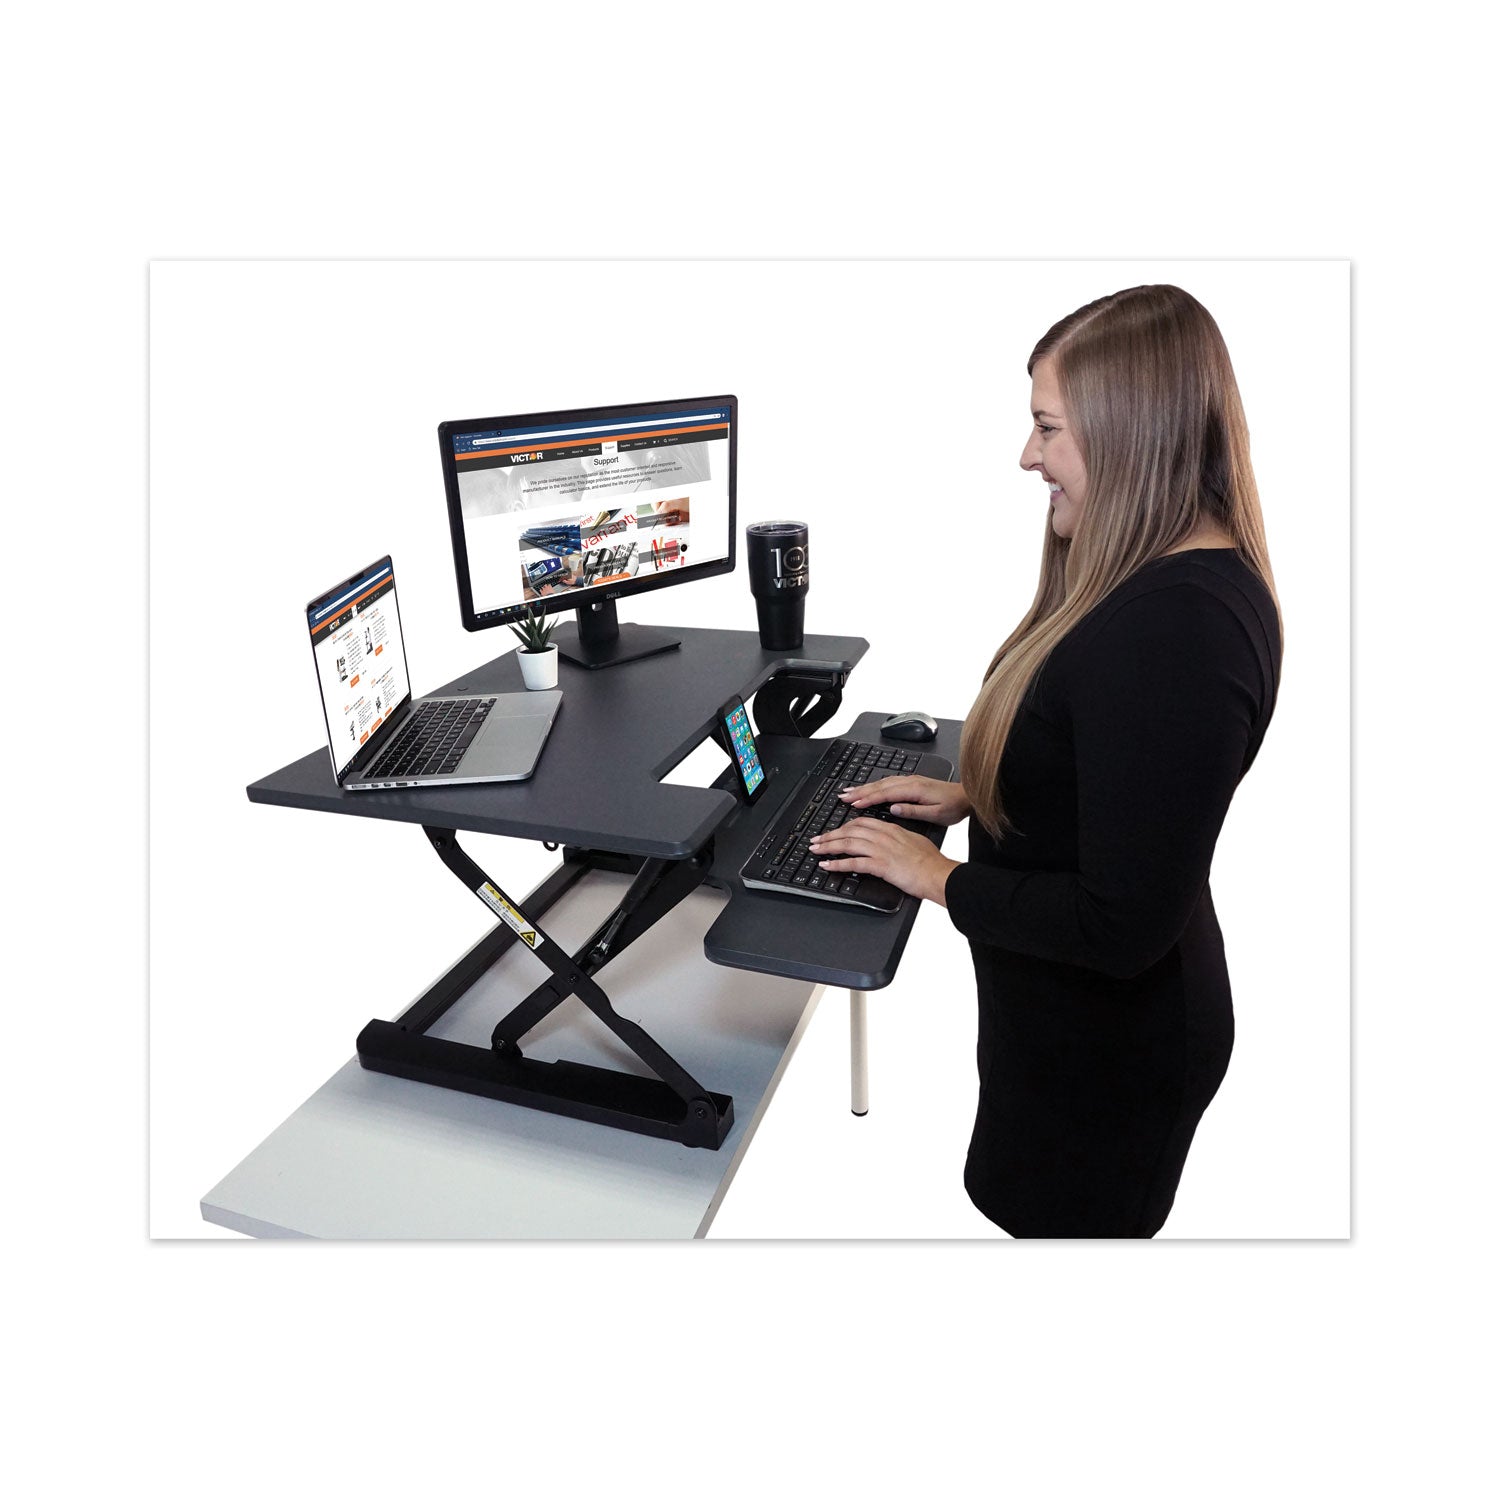 high-rise-height-adjustable-standing-desk-with-keyboard-tray-31-x-3125-x-525-to-20-gray-black_vctdcx710g - 1